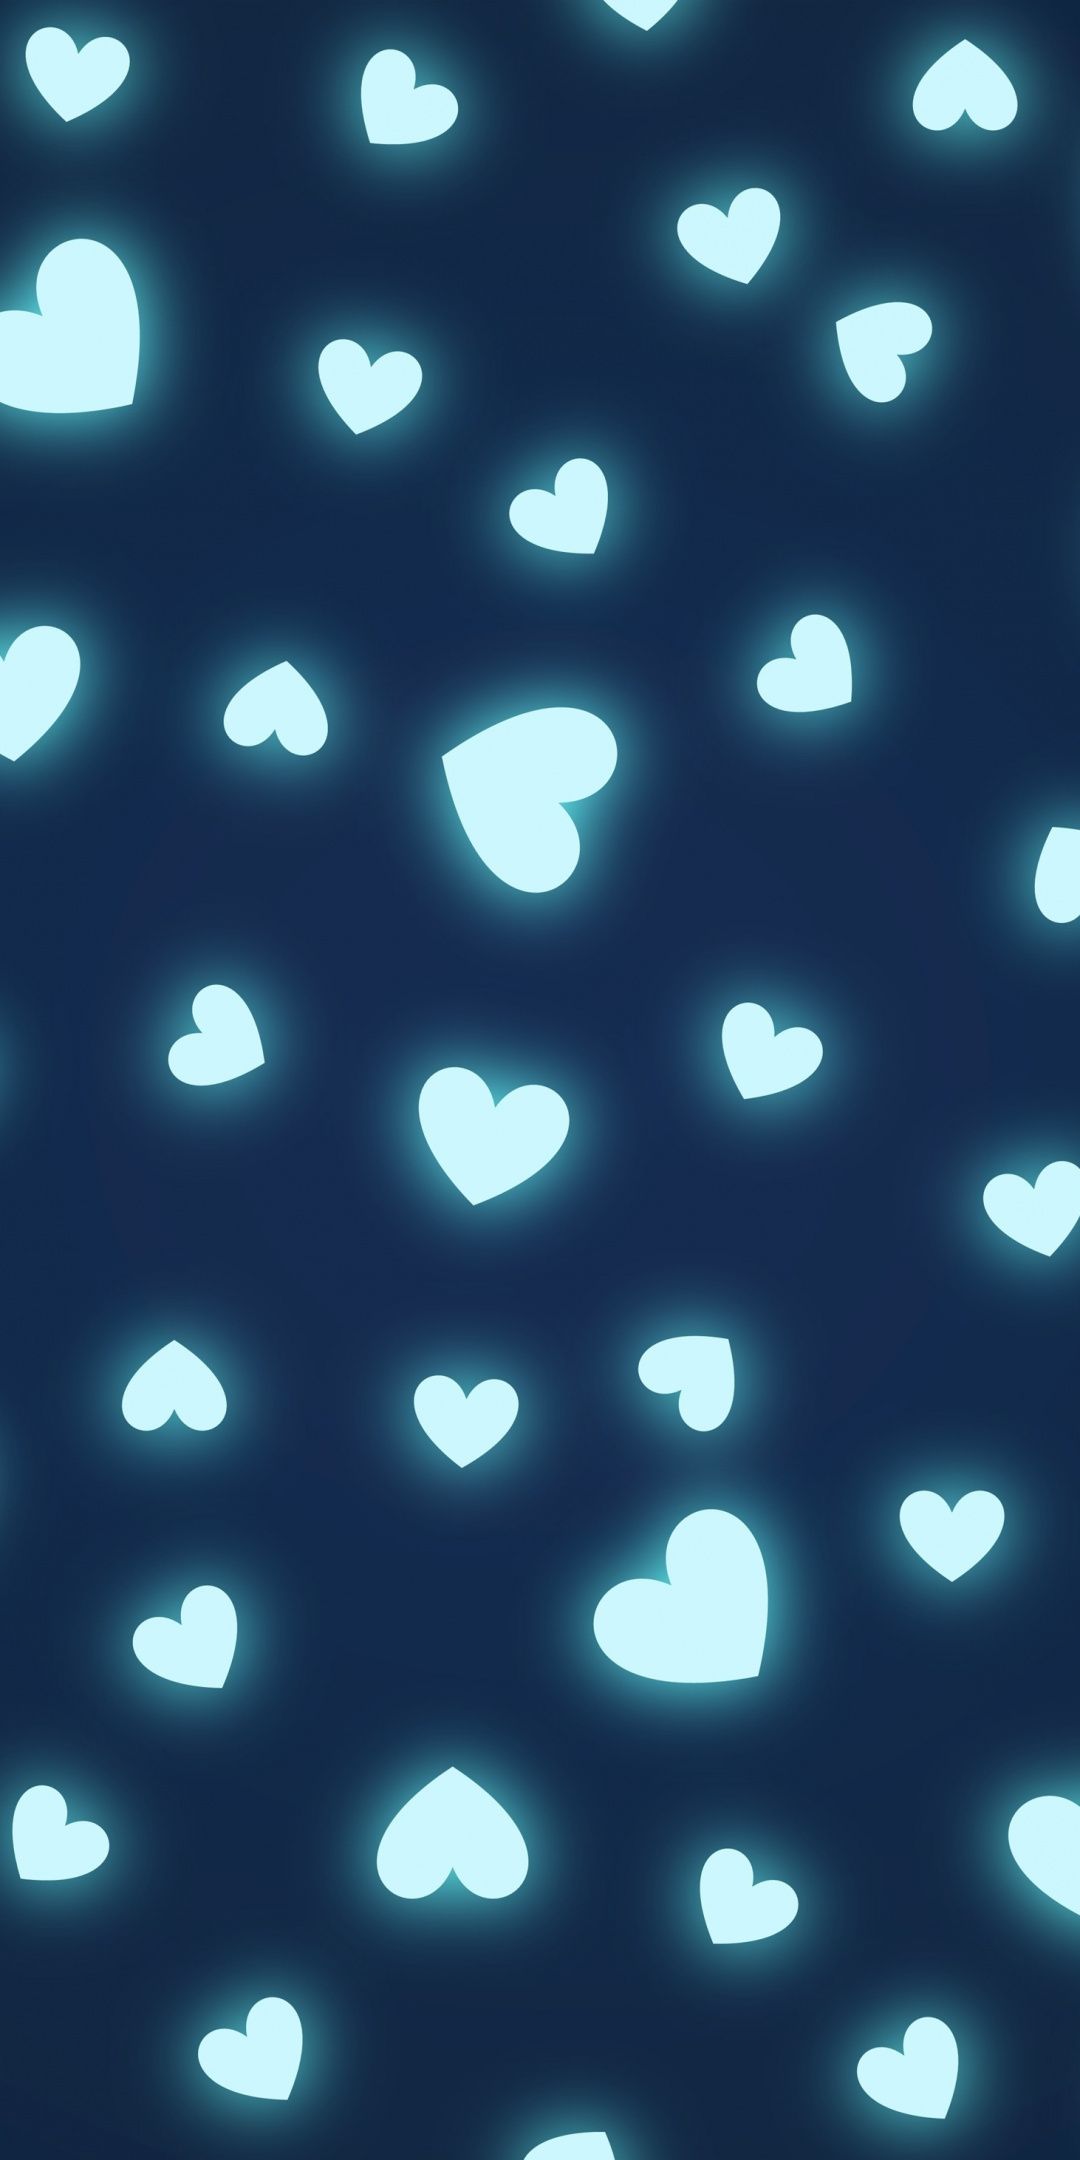 Hearts, shapes, glowing, minimal, pattern, 1080x2160 wallpaper. Cute wallpaper for phone, iPhone background wallpaper, Background phone wallpaper